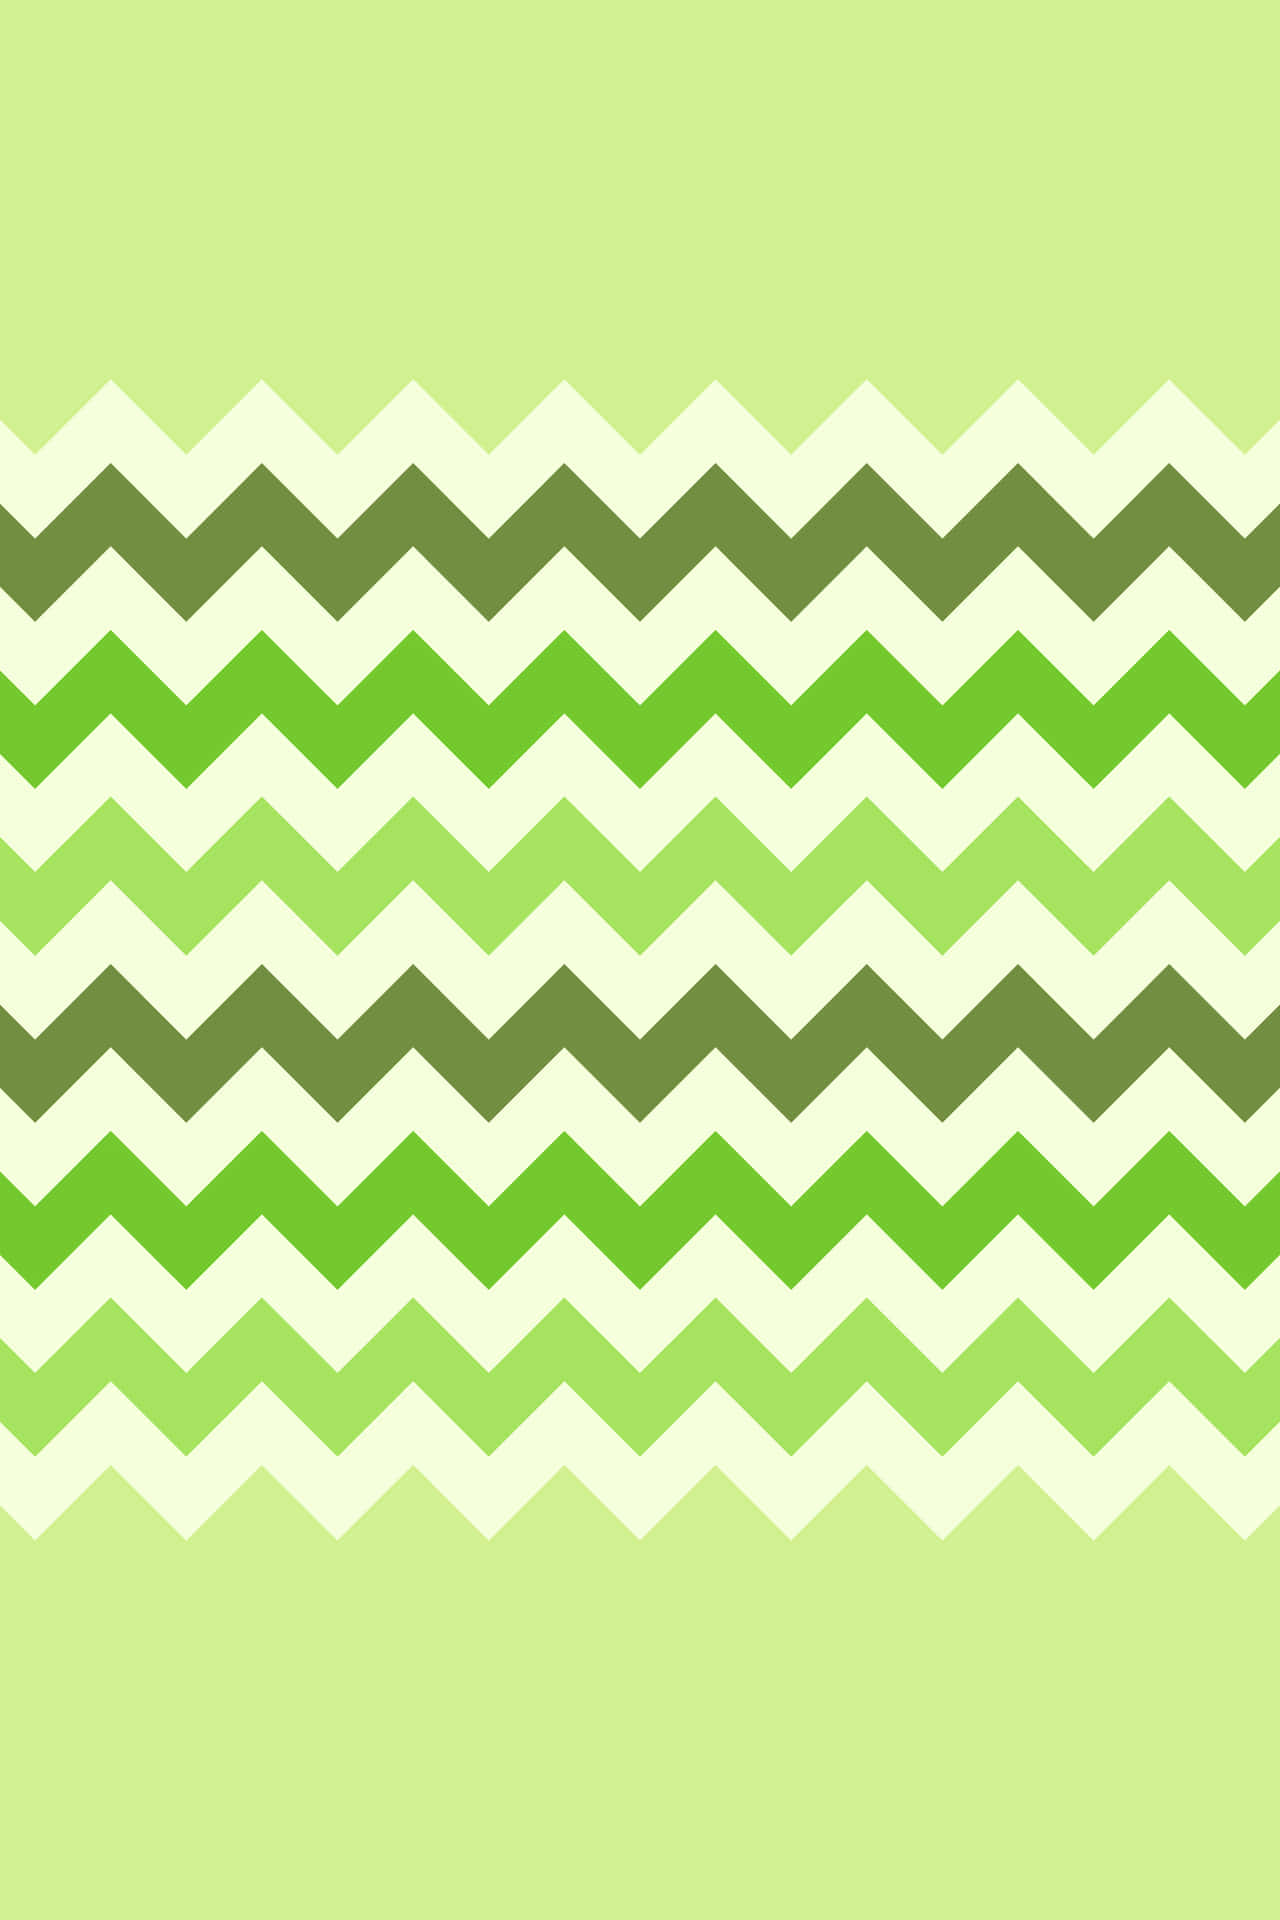 A Green And White Chevron Pattern Background